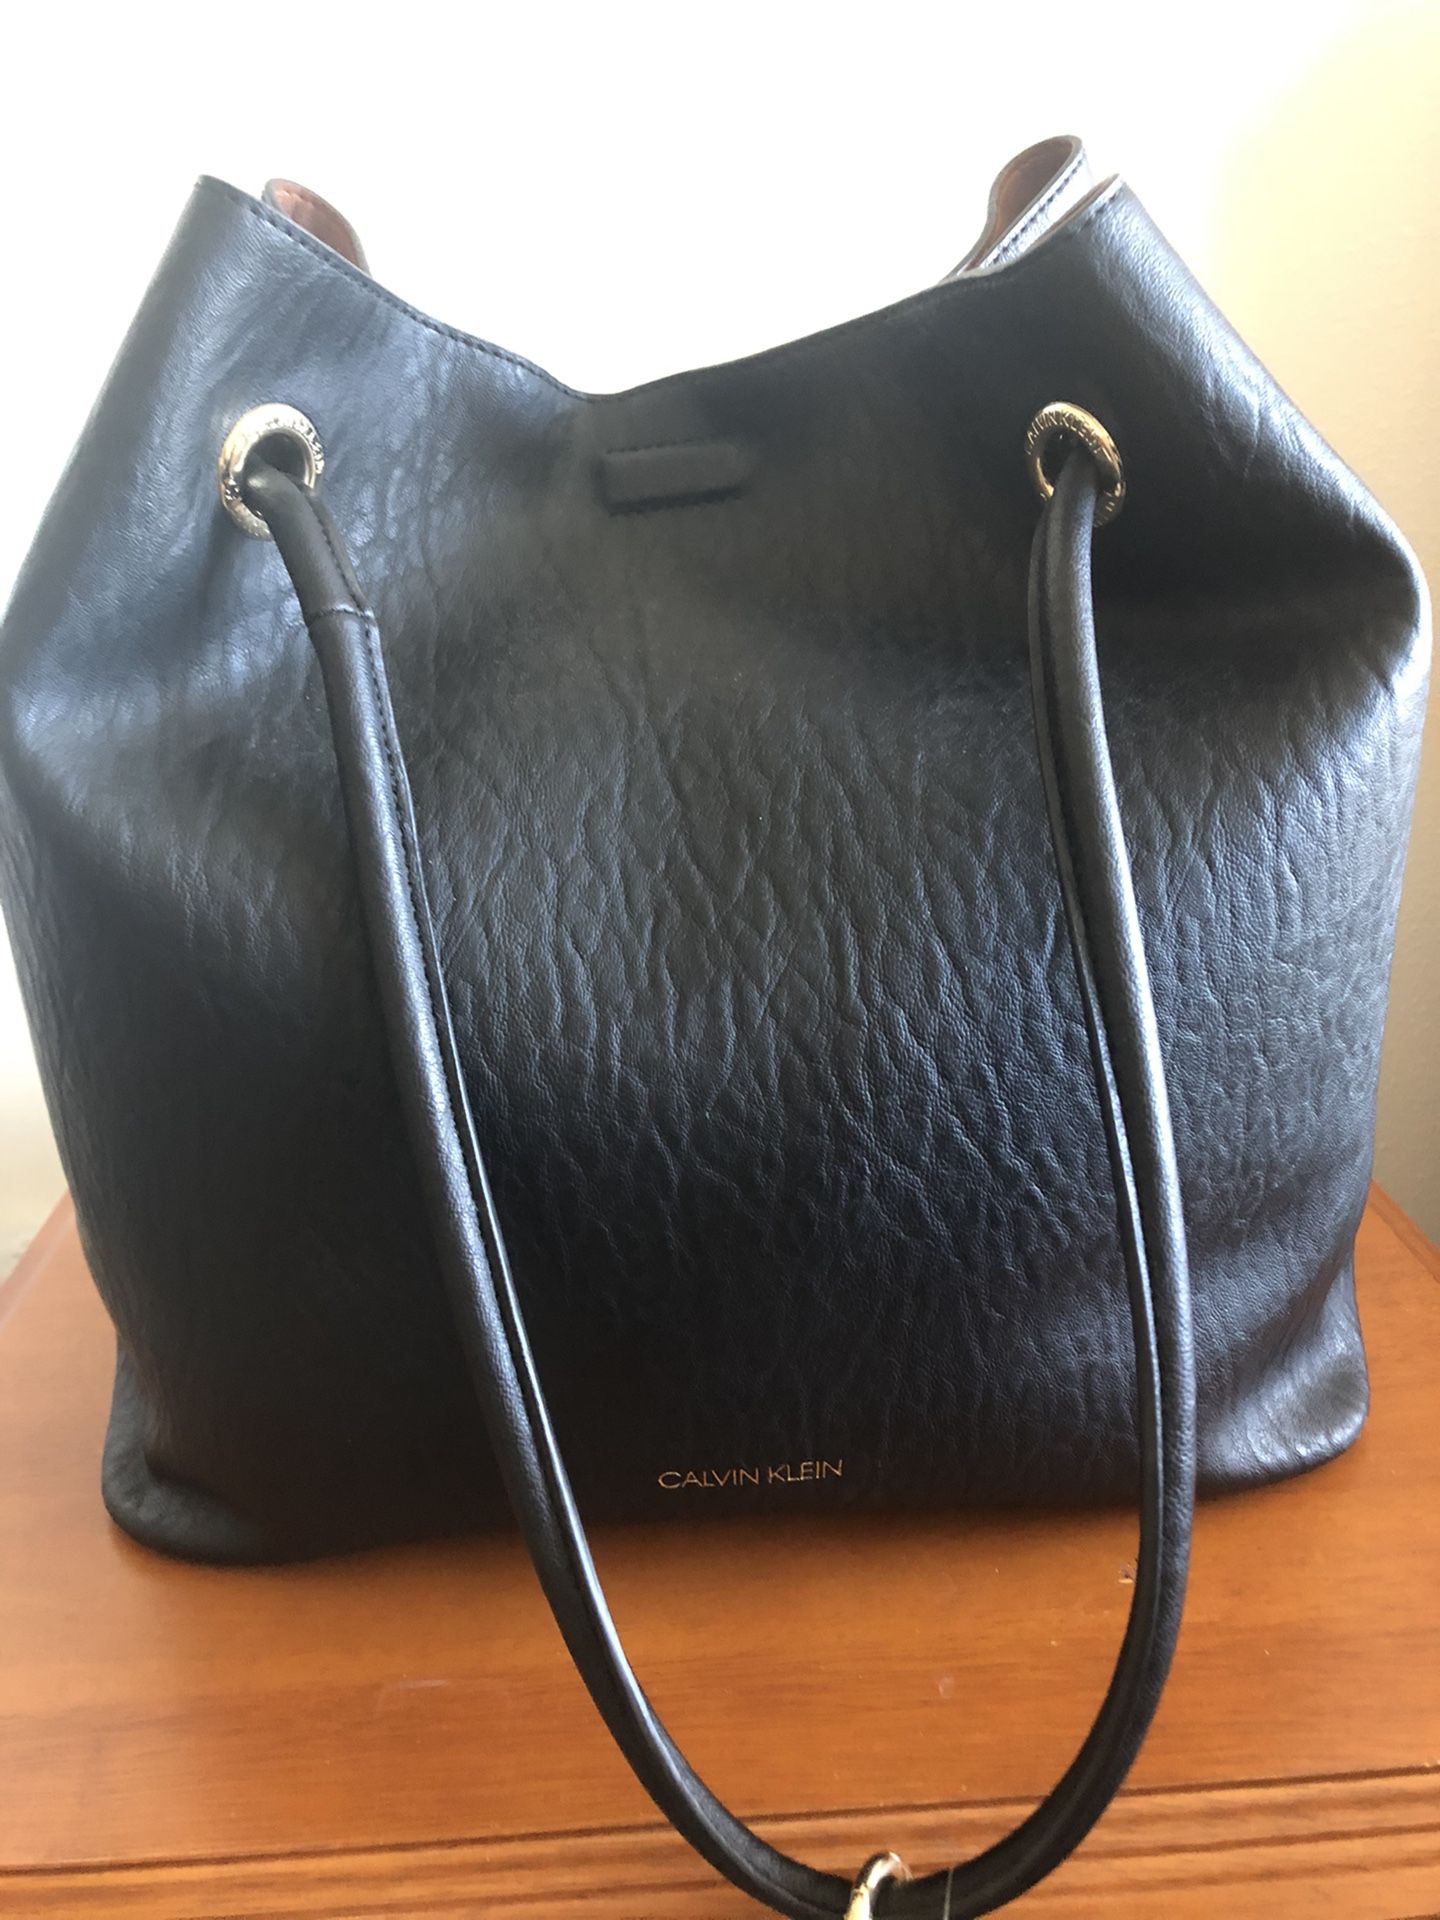 Calvin Klein Large Leather Bag NEW!